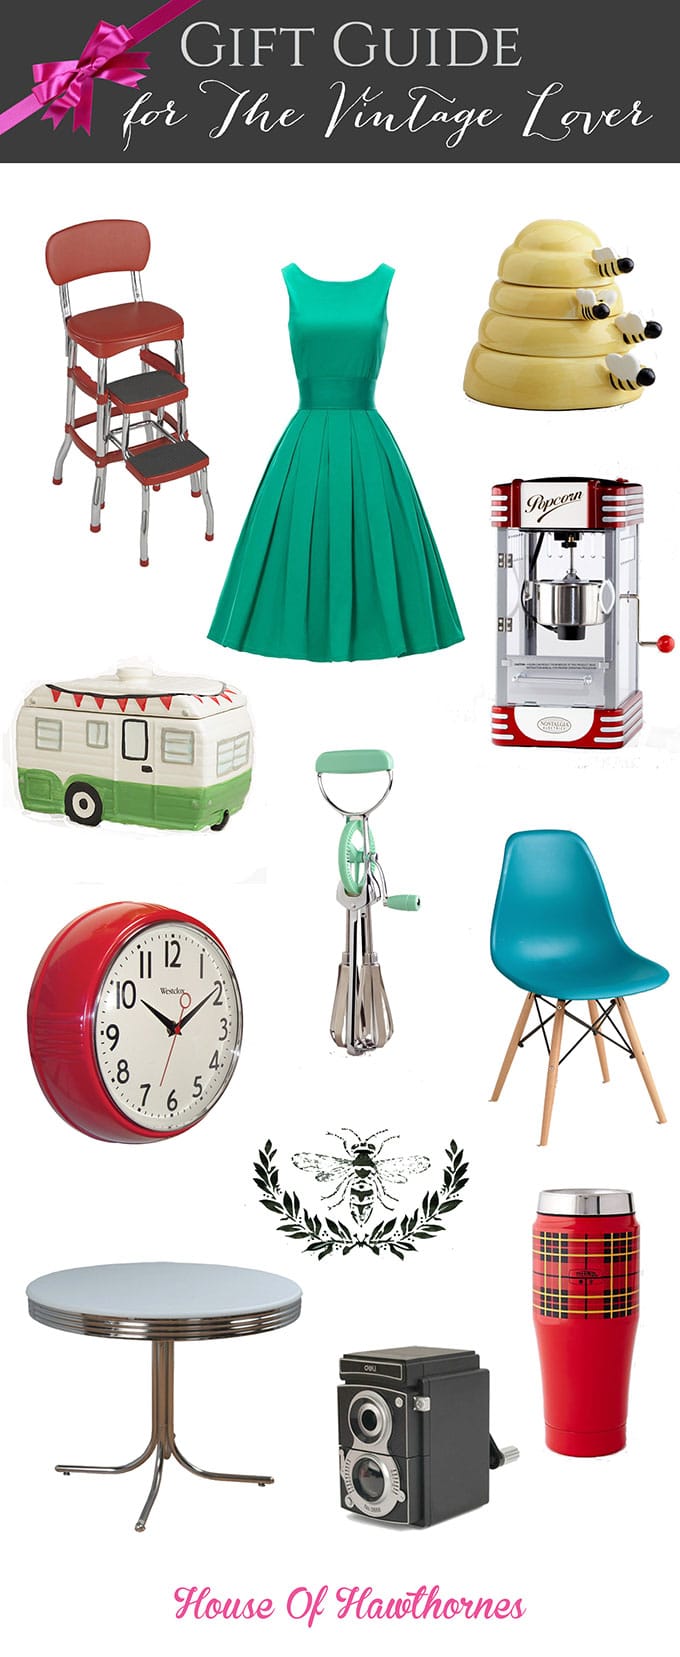 Gift Guide For The Vintage Lover - 15 Vintage Holiday Gift Ideas